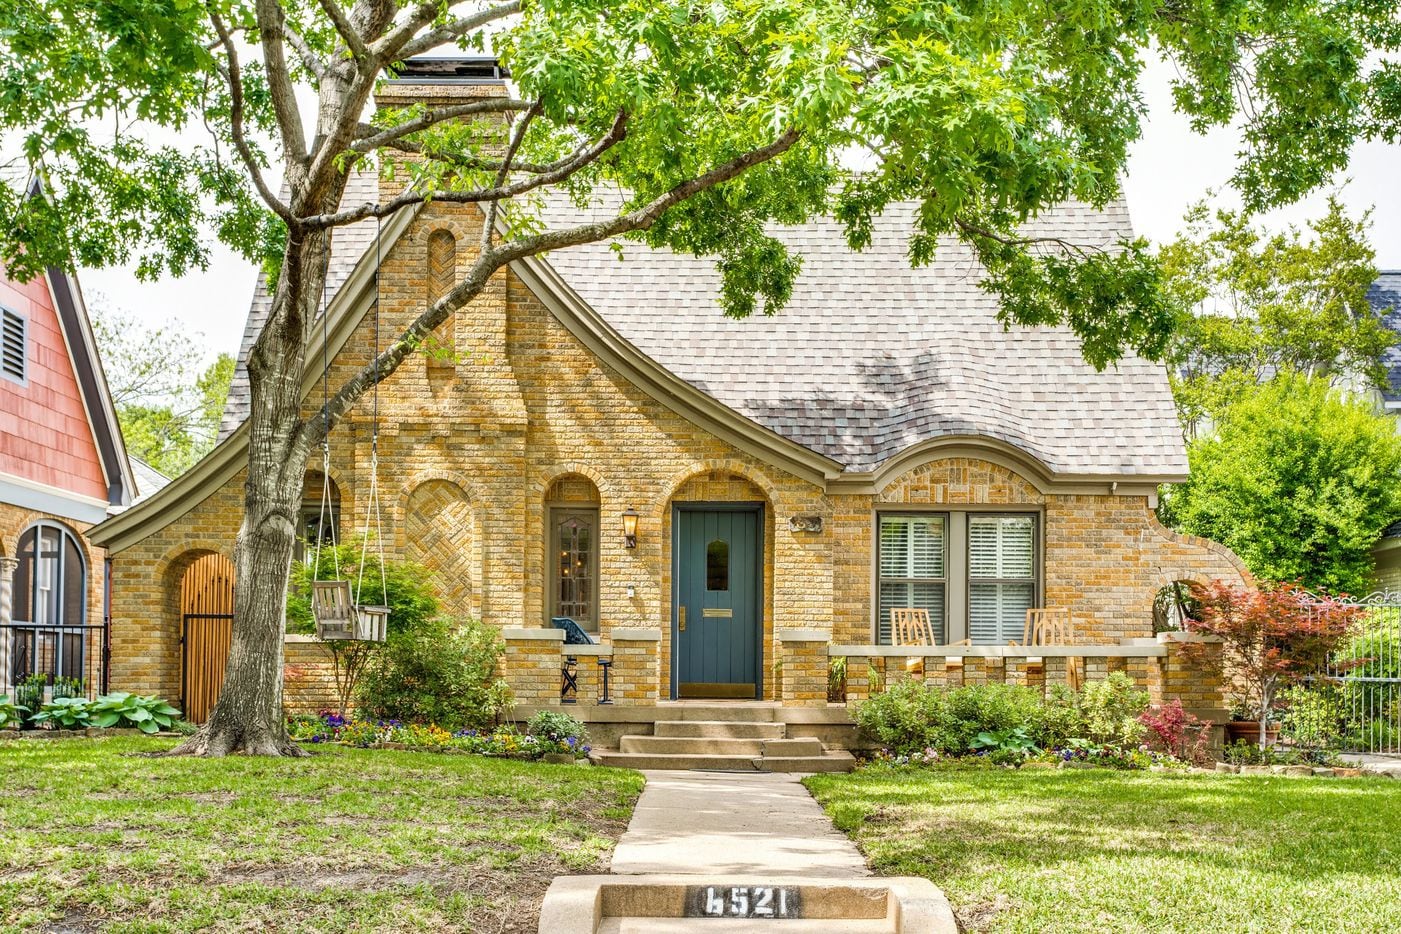 Take a look at the home at 6521 Lakeshore Drive in Dallas.